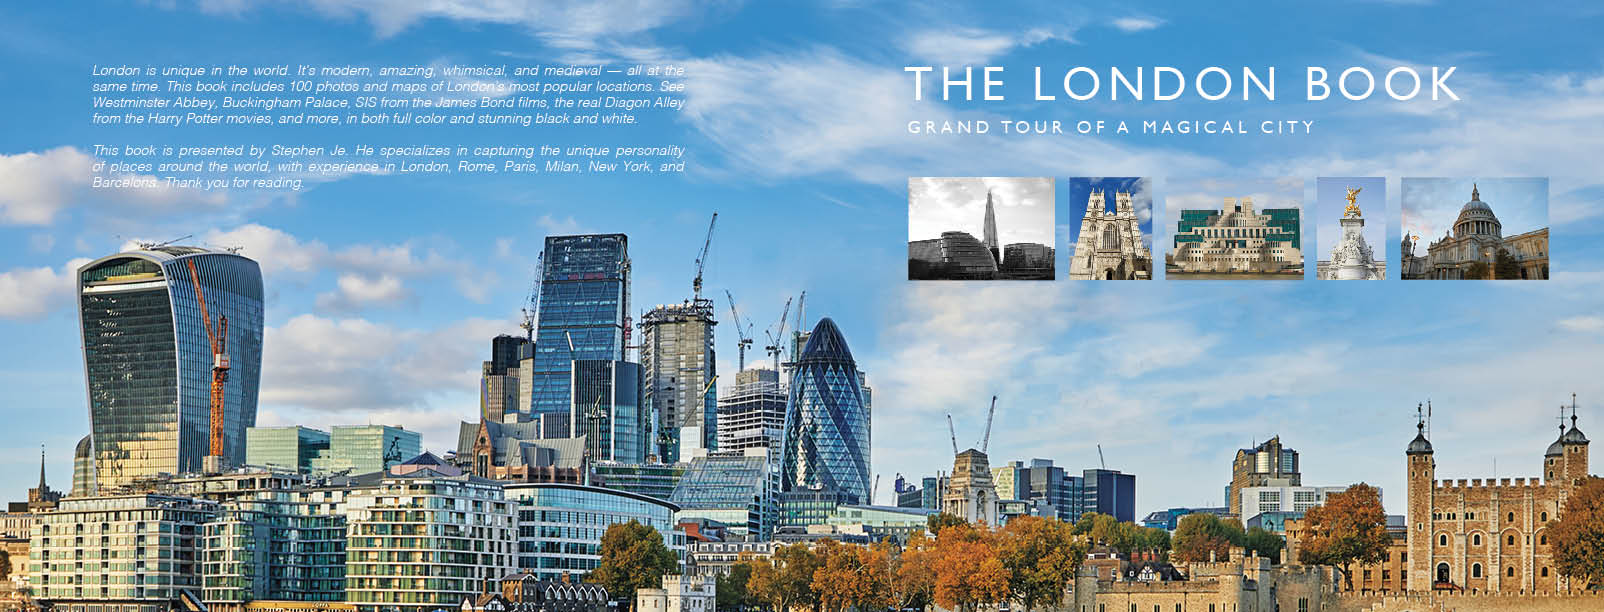 The London Book, by Stephen Je